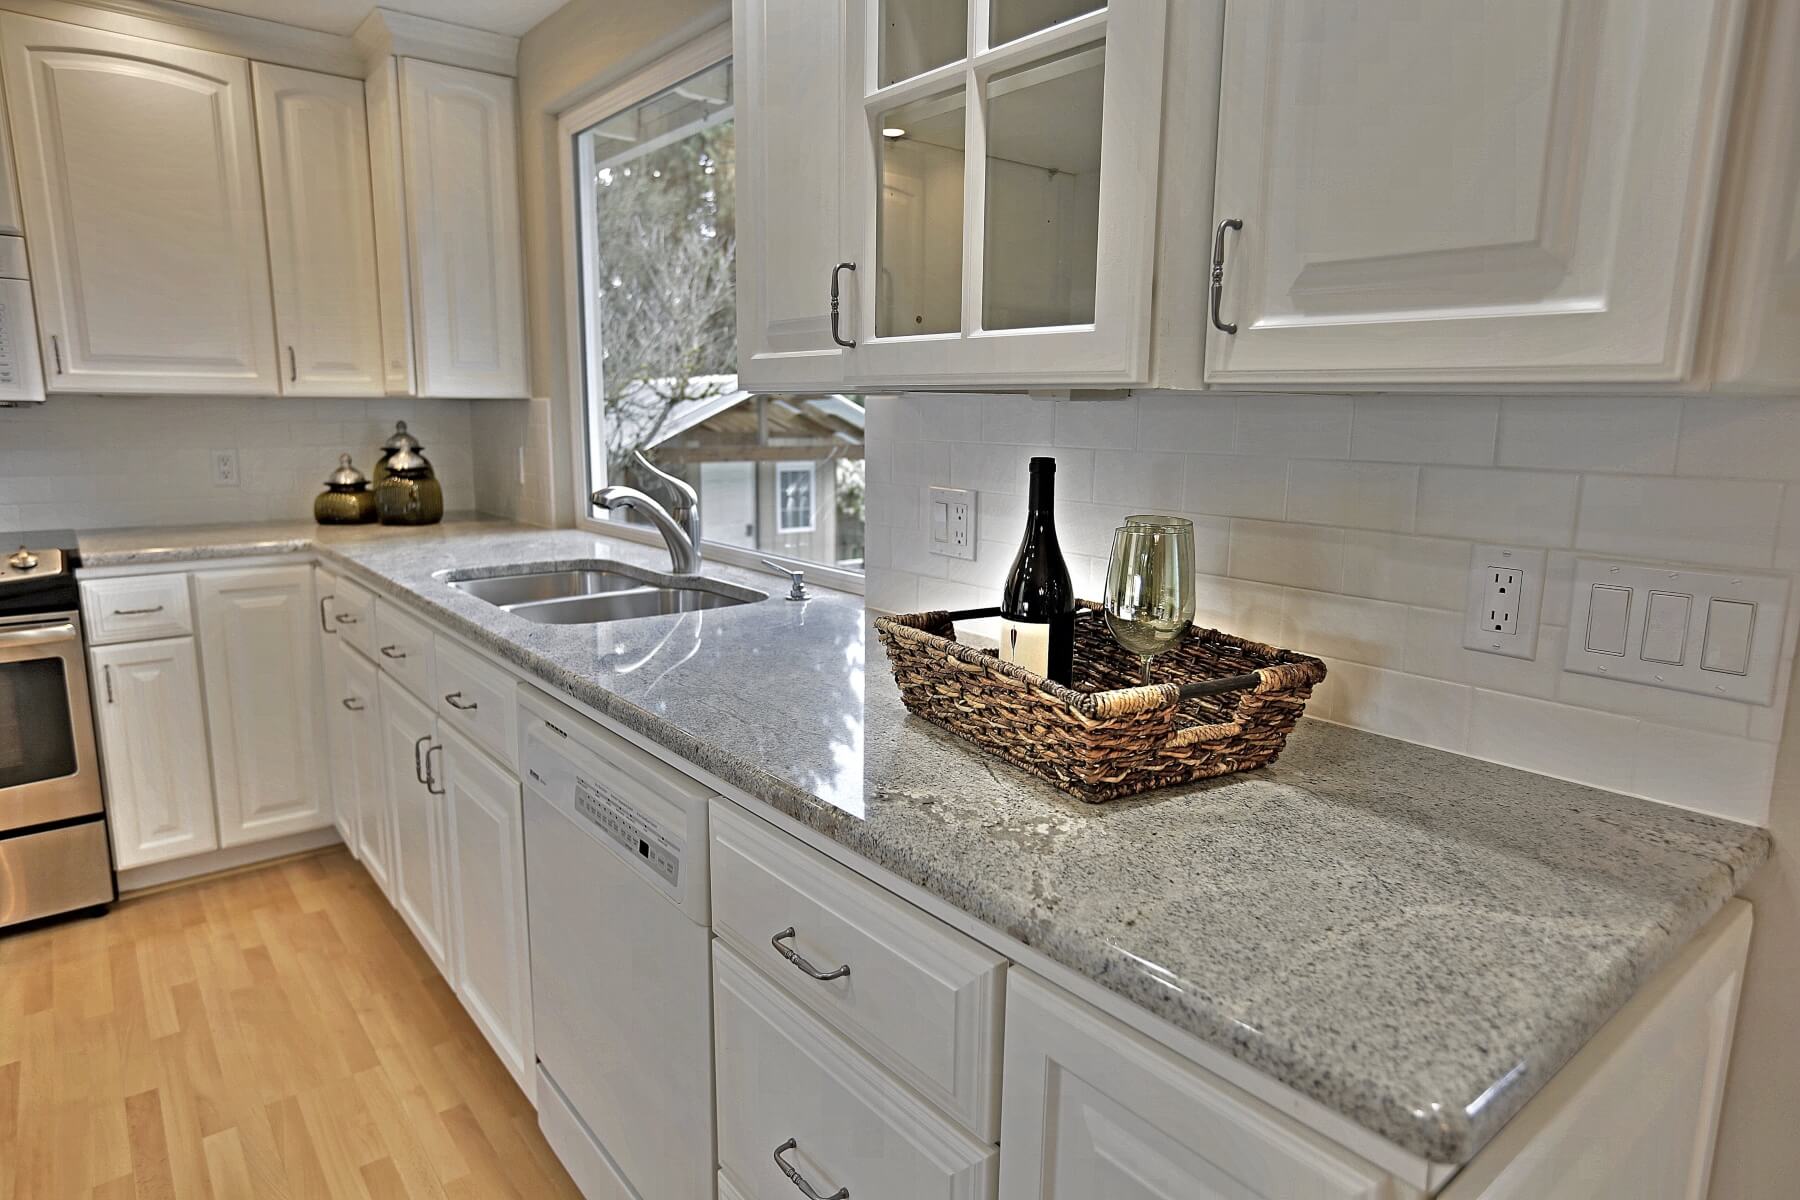 Modern kitchen featuring a quartz counter top and a wine bottle in a basket with wine glasses